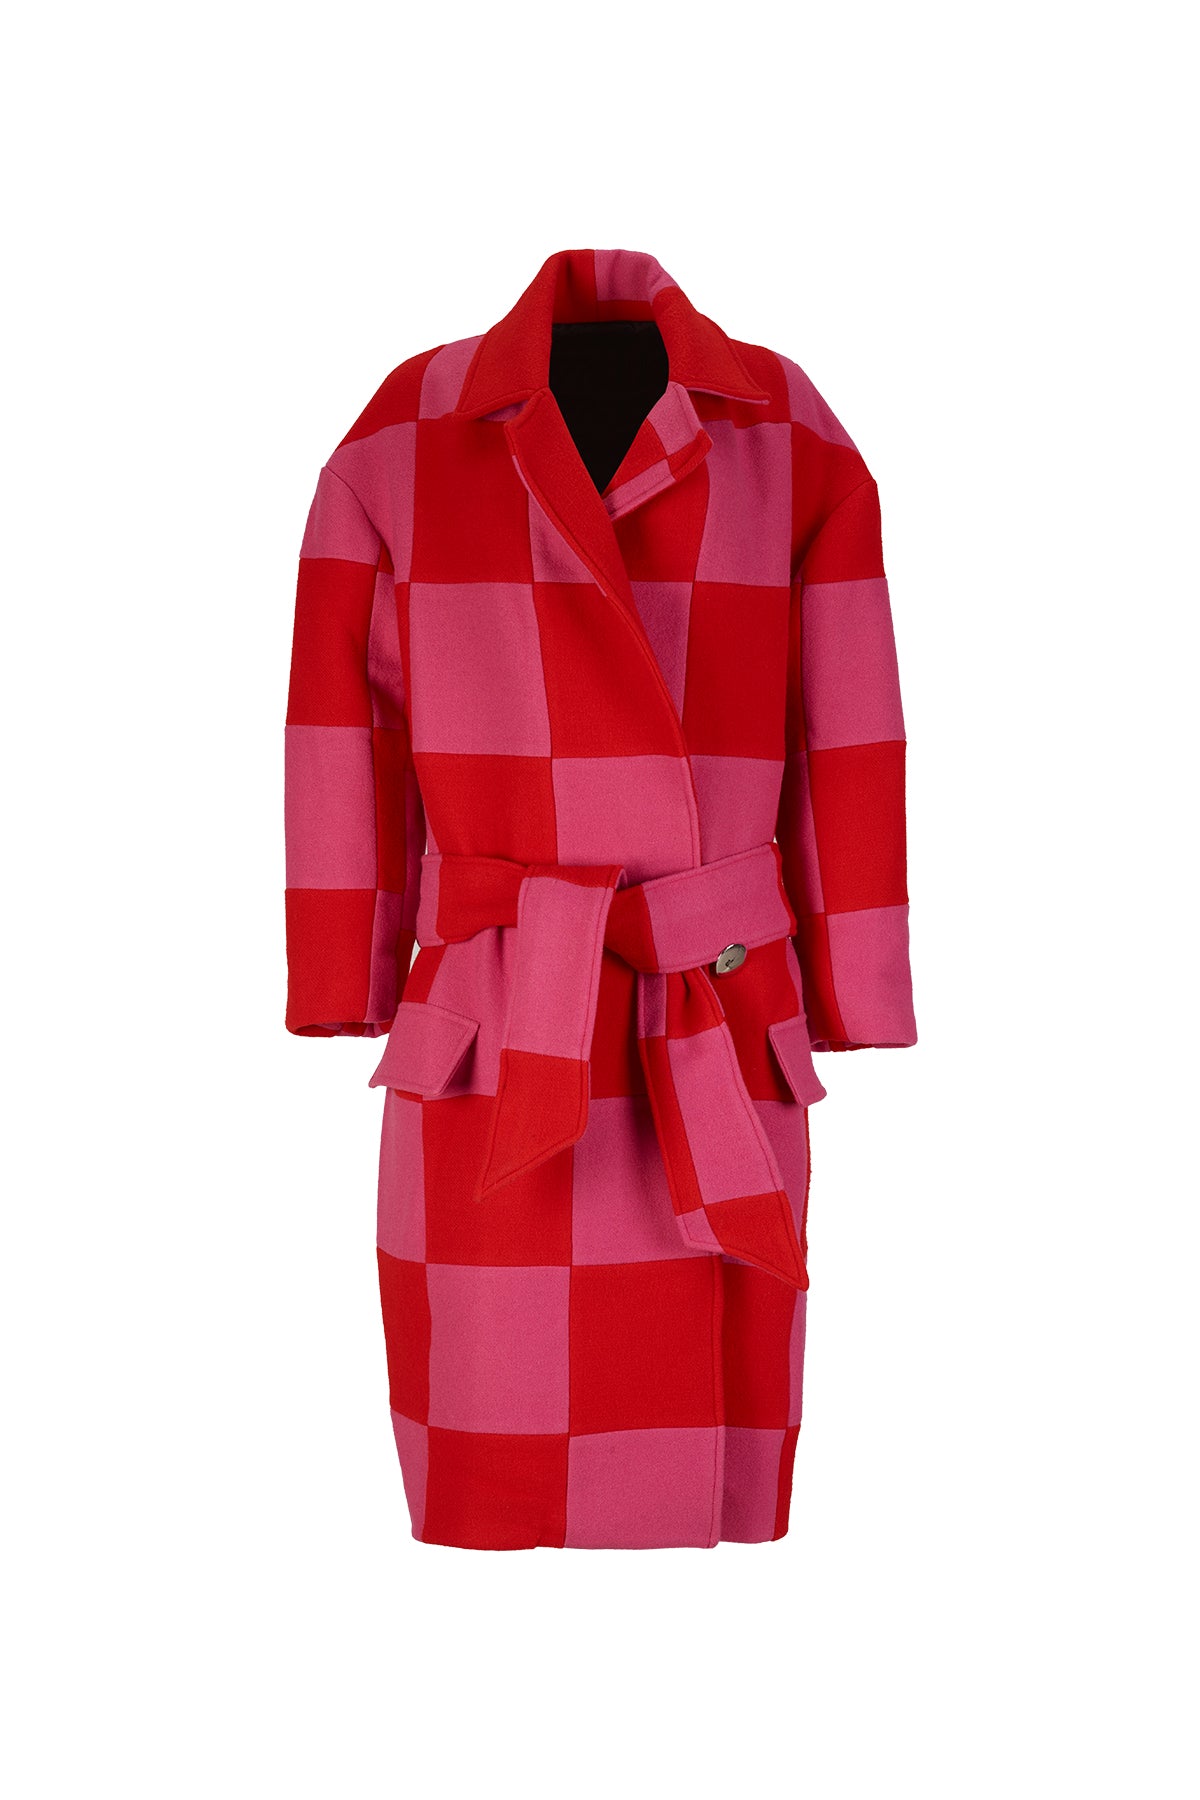 PINK AND RED CHECKED LONG COAT marques almeida